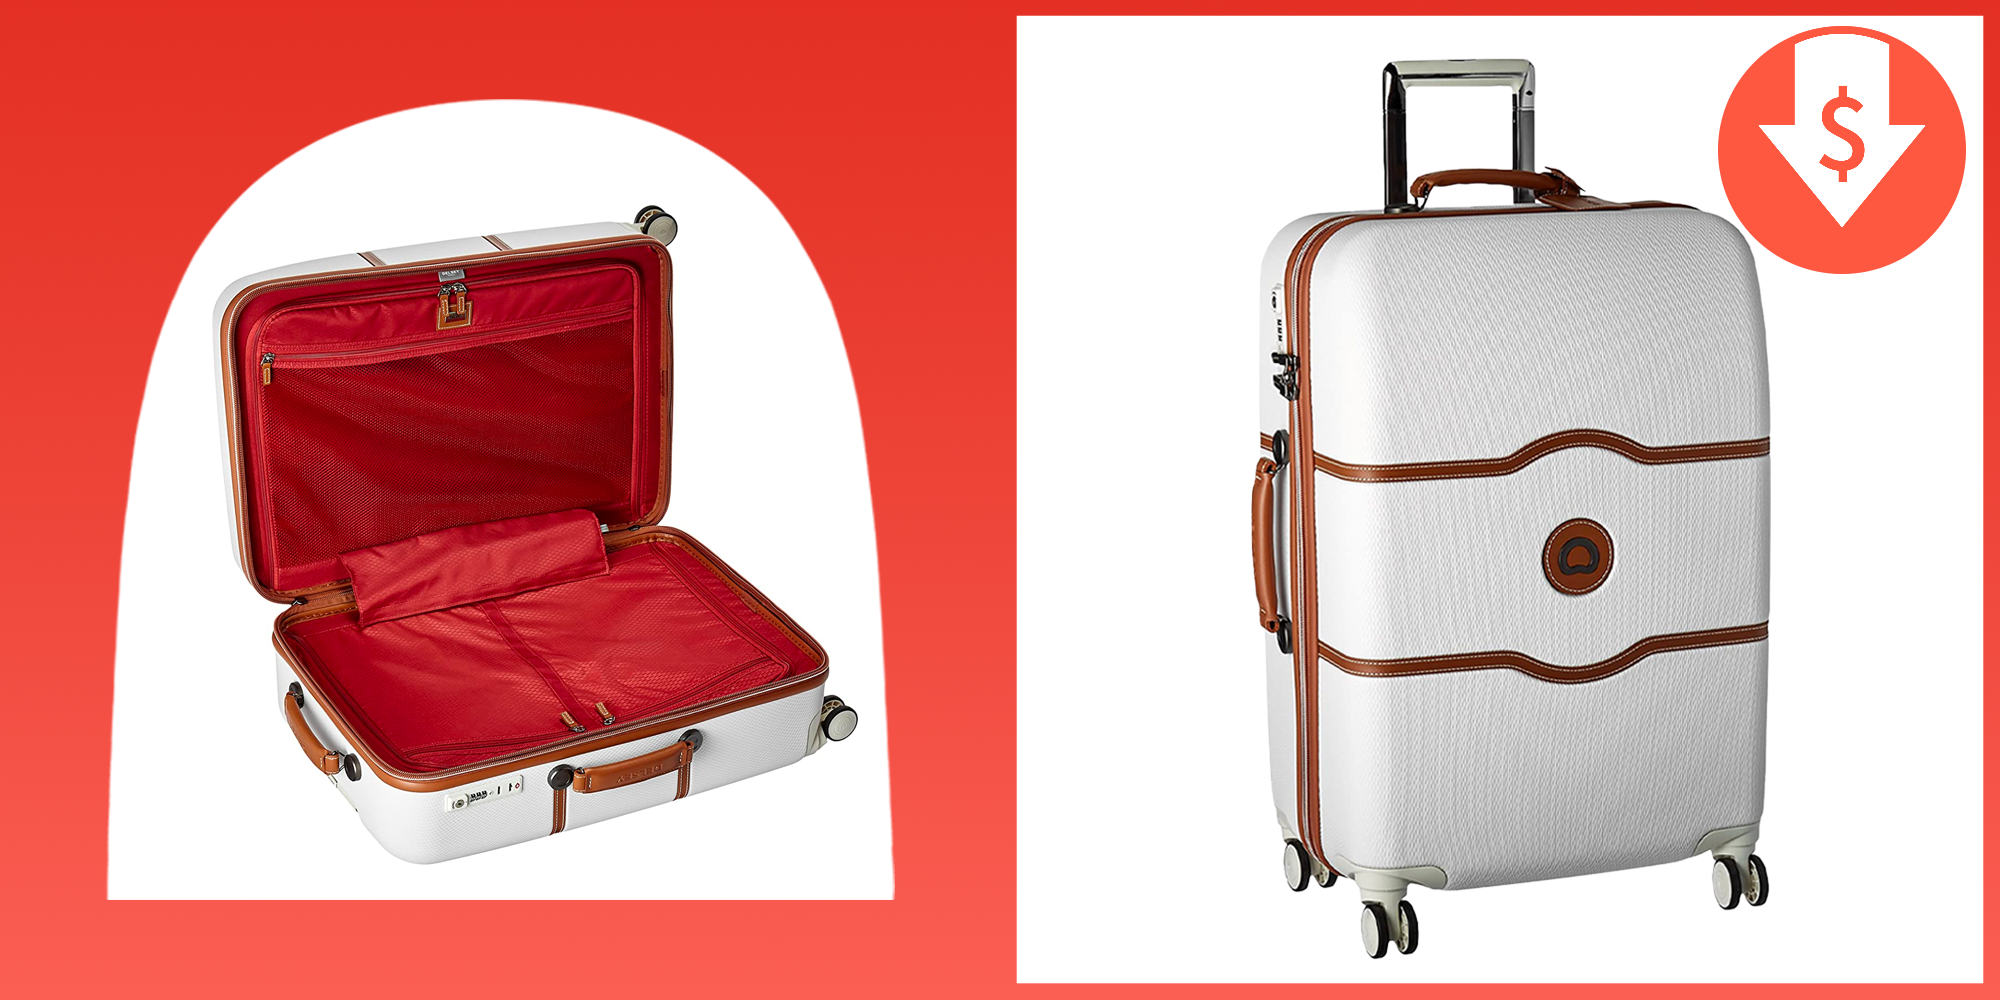 Start your trip right with the sturdy and luxurious Delsey Chatelet  carry-on | CNN Underscored